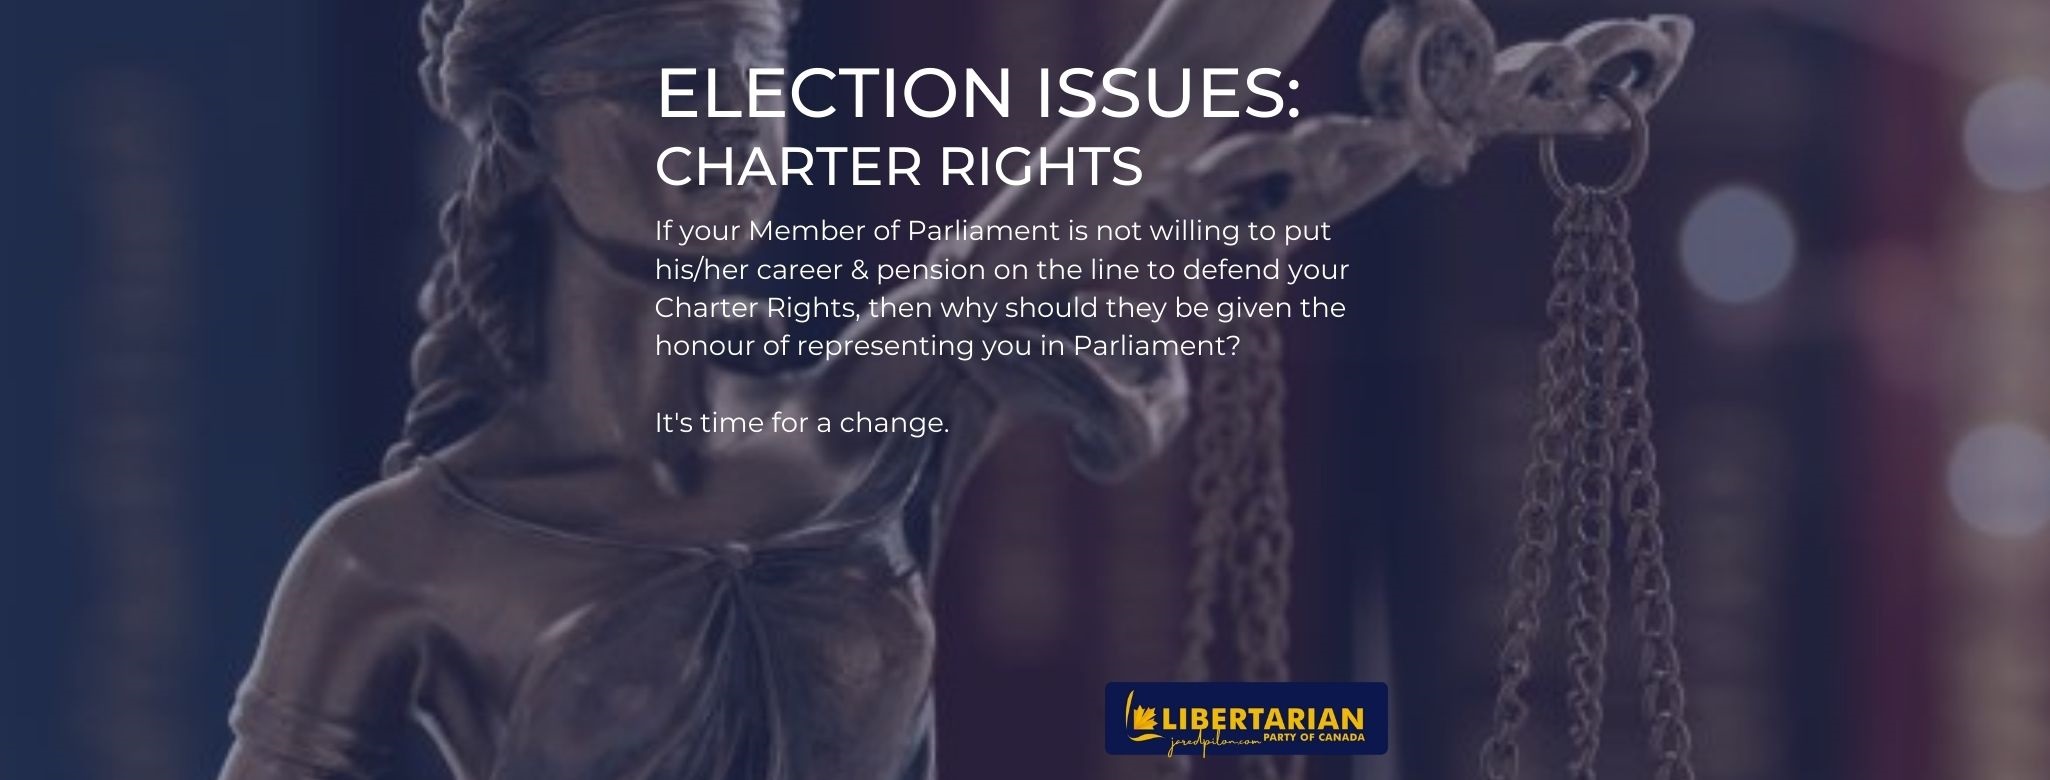 2021 Election Issues: Charter Rights